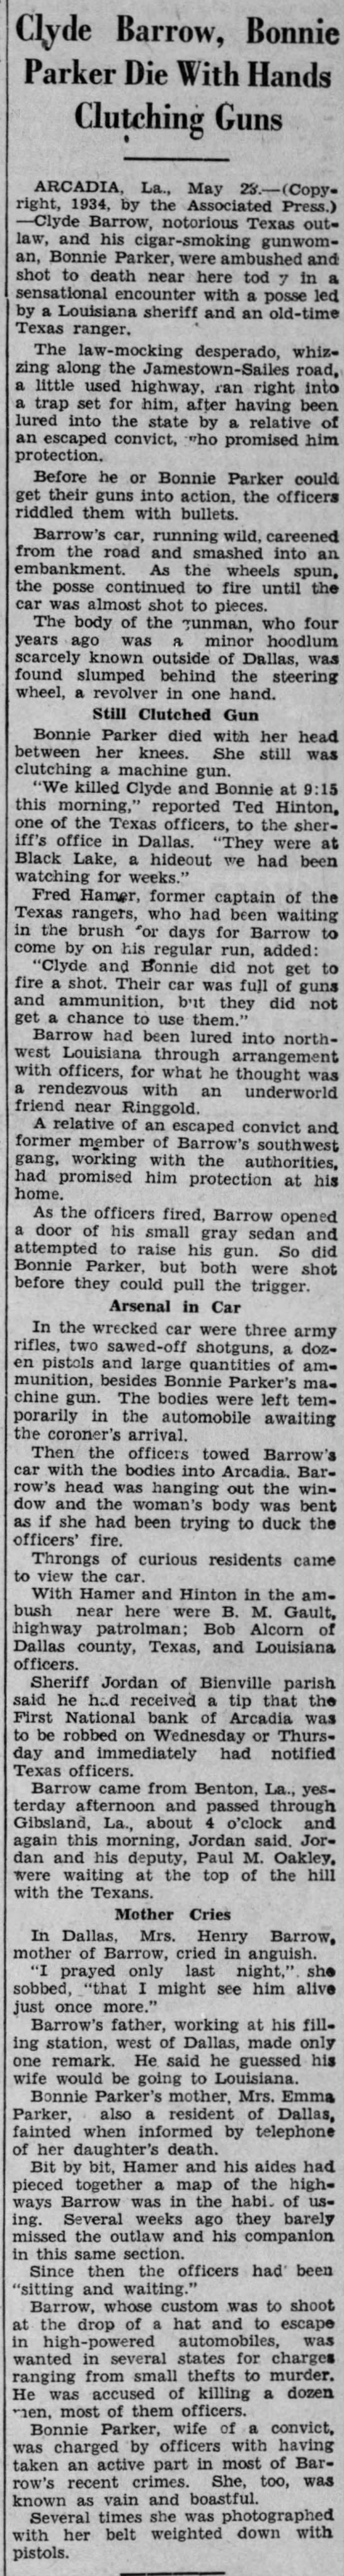 Newspaper account of Bonnie and Clyde being ambushed and killed by police - 